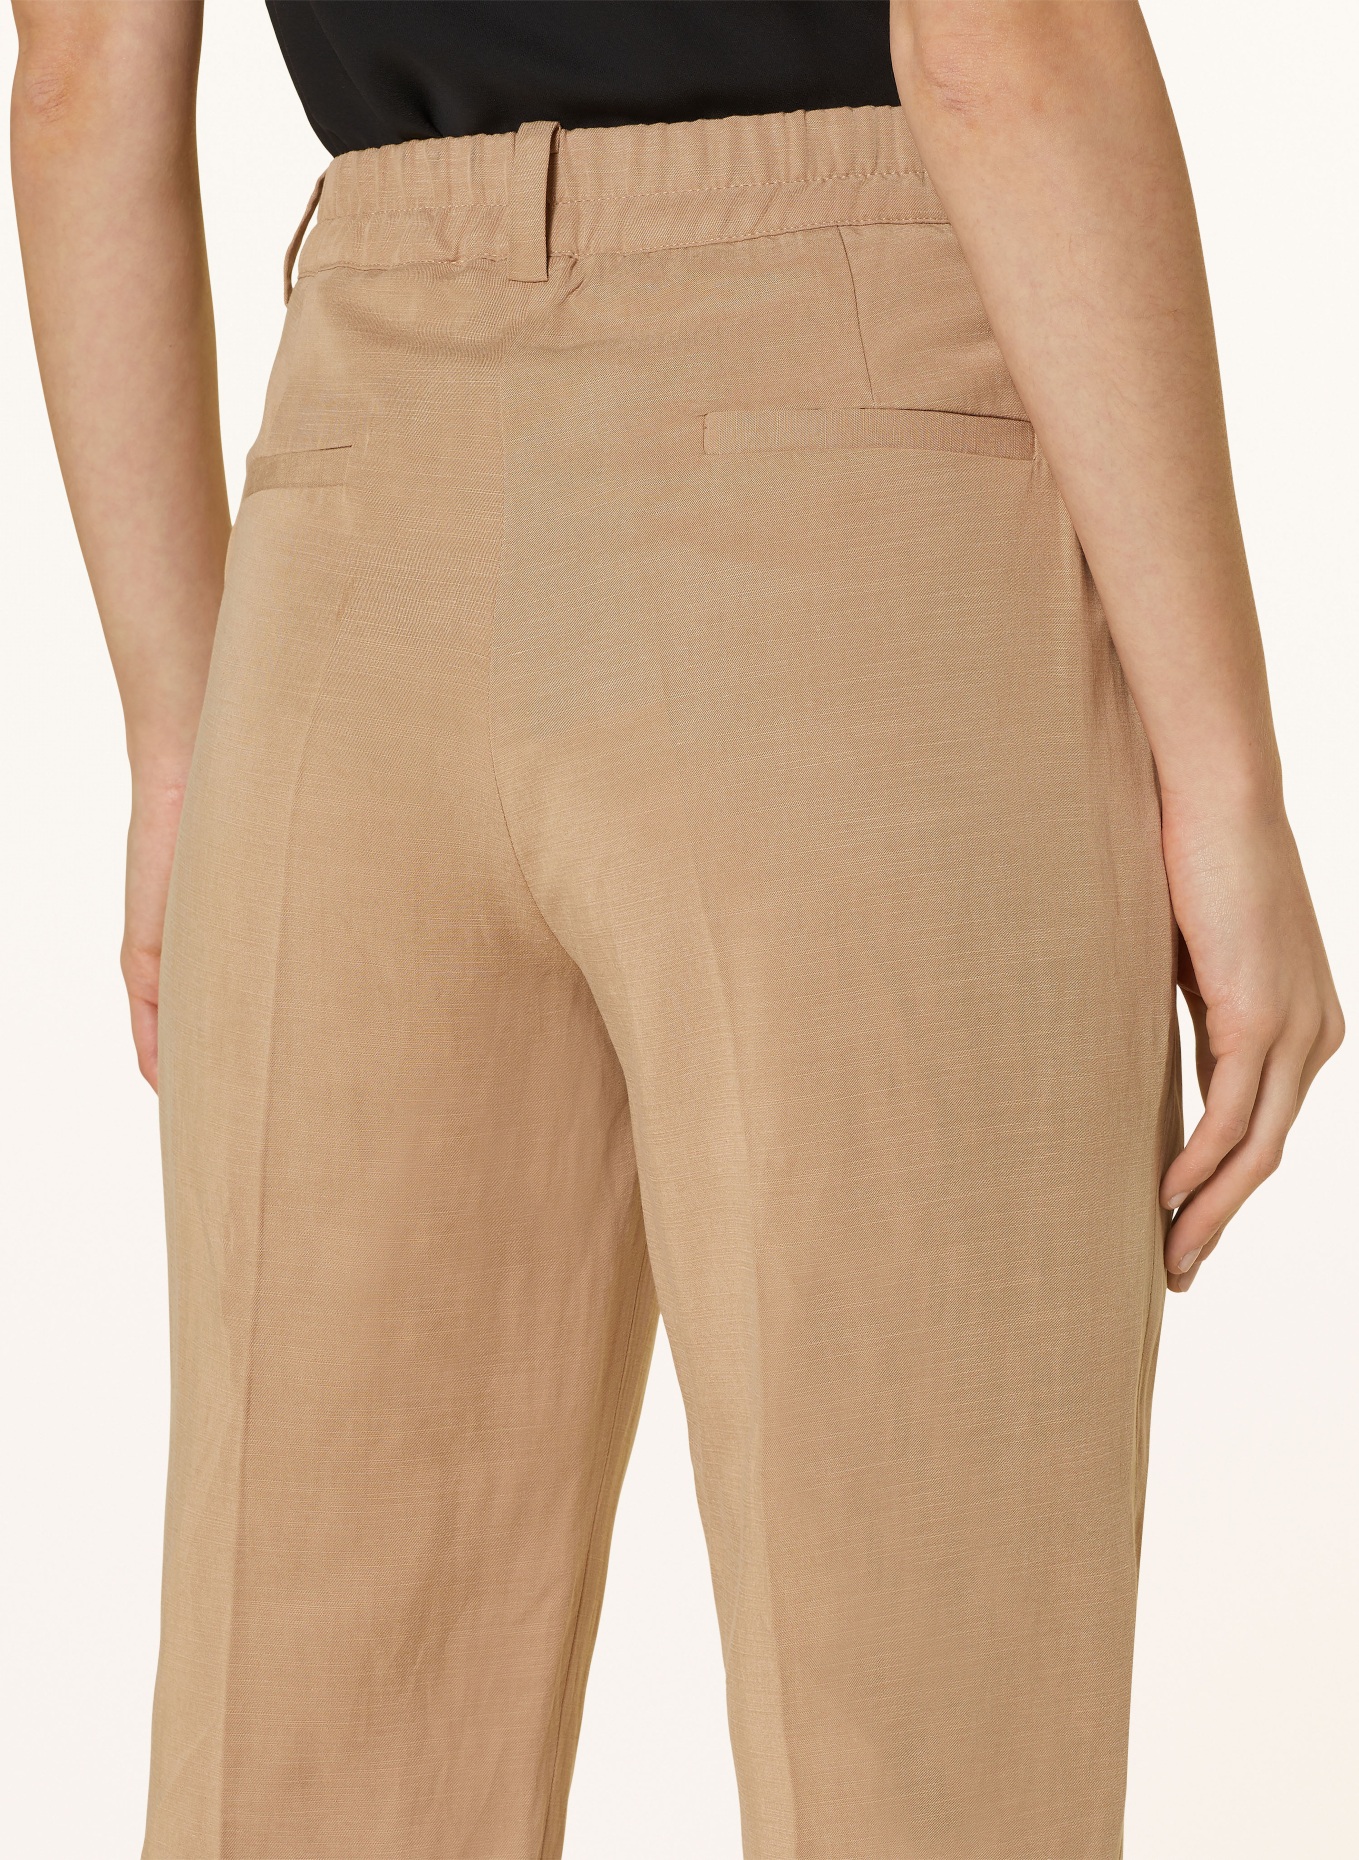 MORE & MORE Trousers, Color: LIGHT BROWN (Image 5)